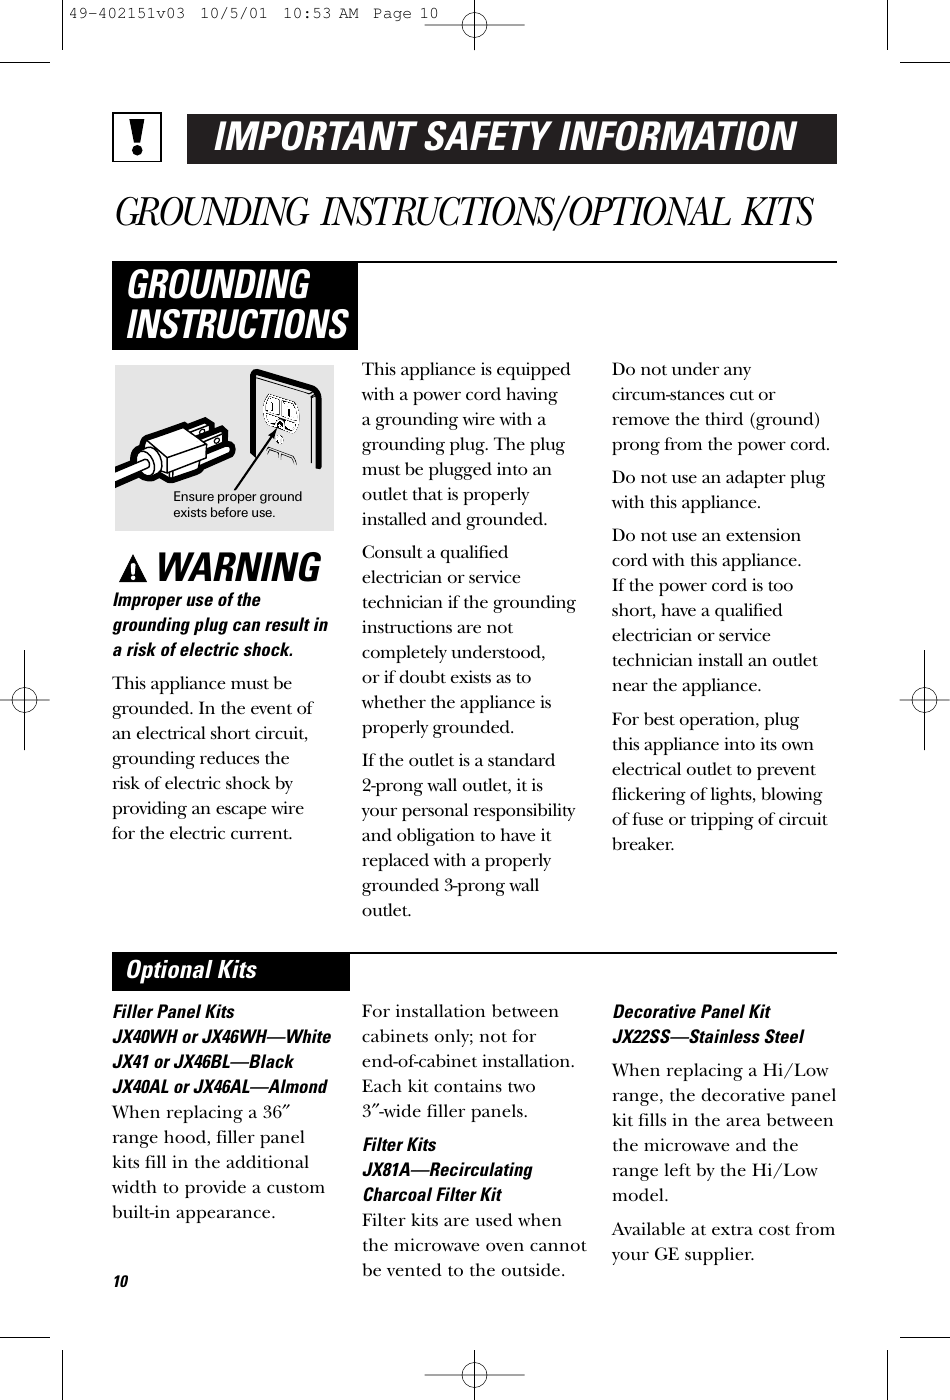 IMPORTANT SAFETY INFORMATIONGROUNDING INSTRUCTIONS/OPTIONAL KITSWARNINGImproper use of thegrounding plug can result ina risk of electric shock.This appliance must begrounded. In the event of an electrical short circuit,grounding reduces the risk of electric shock byproviding an escape wire for the electric current. This appliance is equippedwith a power cord having a grounding wire with agrounding plug. The plugmust be plugged into anoutlet that is properlyinstalled and grounded.Consult a qualified electrician or servicetechnician if the groundinginstructions are notcompletely understood, or if doubt exists as towhether the appliance isproperly grounded.If the outlet is a standard 2-prong wall outlet, it is your personal responsibilityand obligation to have itreplaced with a properlygrounded 3-prong walloutlet.Do not under any circum-stances cut orremove the third (ground)prong from the power cord.Do not use an adapter plugwith this appliance.Do not use an extensioncord with this appliance. If the power cord is tooshort, have a qualifiedelectrician or servicetechnician install an outletnear the appliance.For best operation, plug this appliance into its ownelectrical outlet to preventflickering of lights, blowingof fuse or tripping of circuitbreaker.GROUNDINGINSTRUCTIONSFiller Panel KitsJX40WH or JX46WH—WhiteJX41 or JX46BL—BlackJX40AL or JX46AL—AlmondWhen replacing a 36″range hood, filler panelkits fill in the additionalwidth to provide a custombuilt-in appearance. For installation betweencabinets only; not for end-of-cabinet installation.Each kit contains two 3″-wide filler panels. Filter KitsJX81A—RecirculatingCharcoal Filter KitFilter kits are used whenthe microwave oven cannotbe vented to the outside.Decorative Panel KitJX22SS—Stainless SteelWhen replacing a Hi/Lowrange, the decorative panelkit fills in the area betweenthe microwave and therange left by the Hi/Lowmodel.Available at extra cost fromyour GE supplier.Optional KitsEnsure proper groundexists before use.1049-402151v03  10/5/01  10:53 AM  Page 10